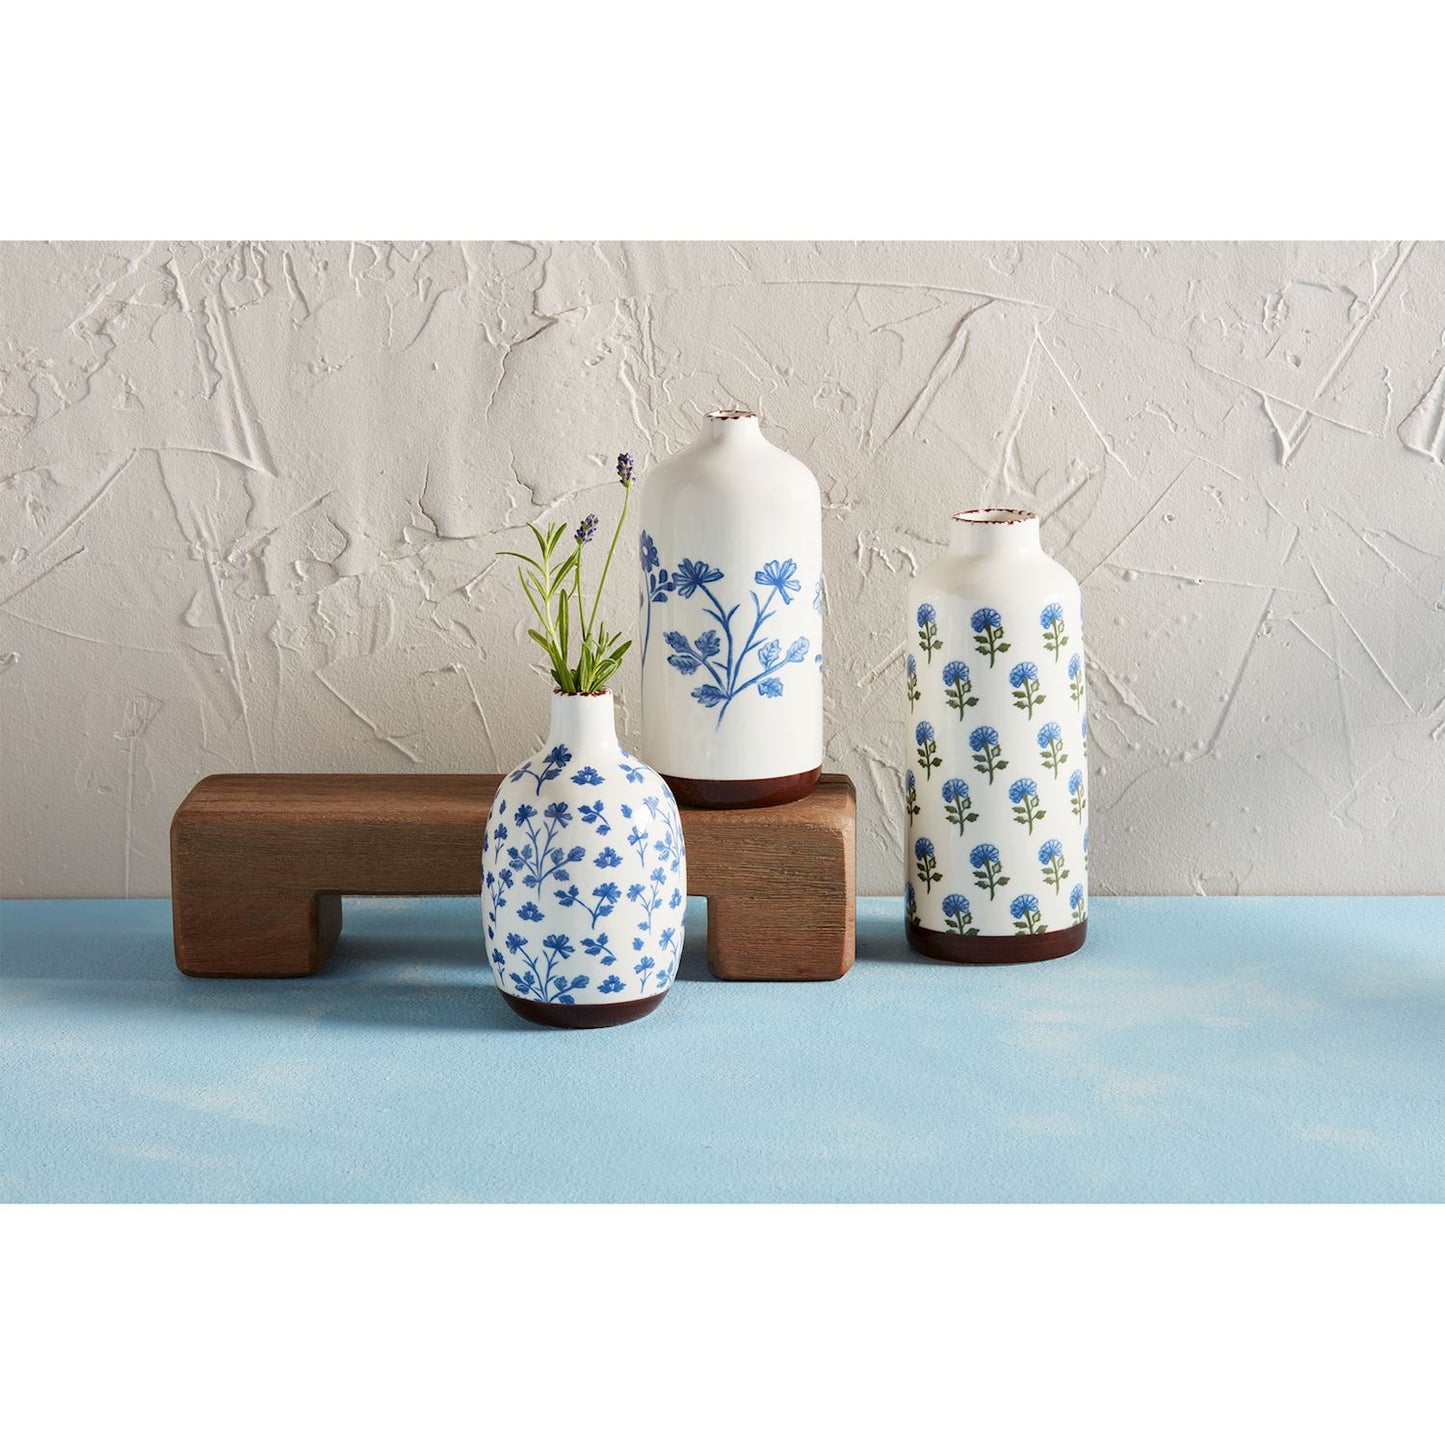 3 sizes and style of blue floral vases arranged on a blue table with a riser, small vase has greenery in it.